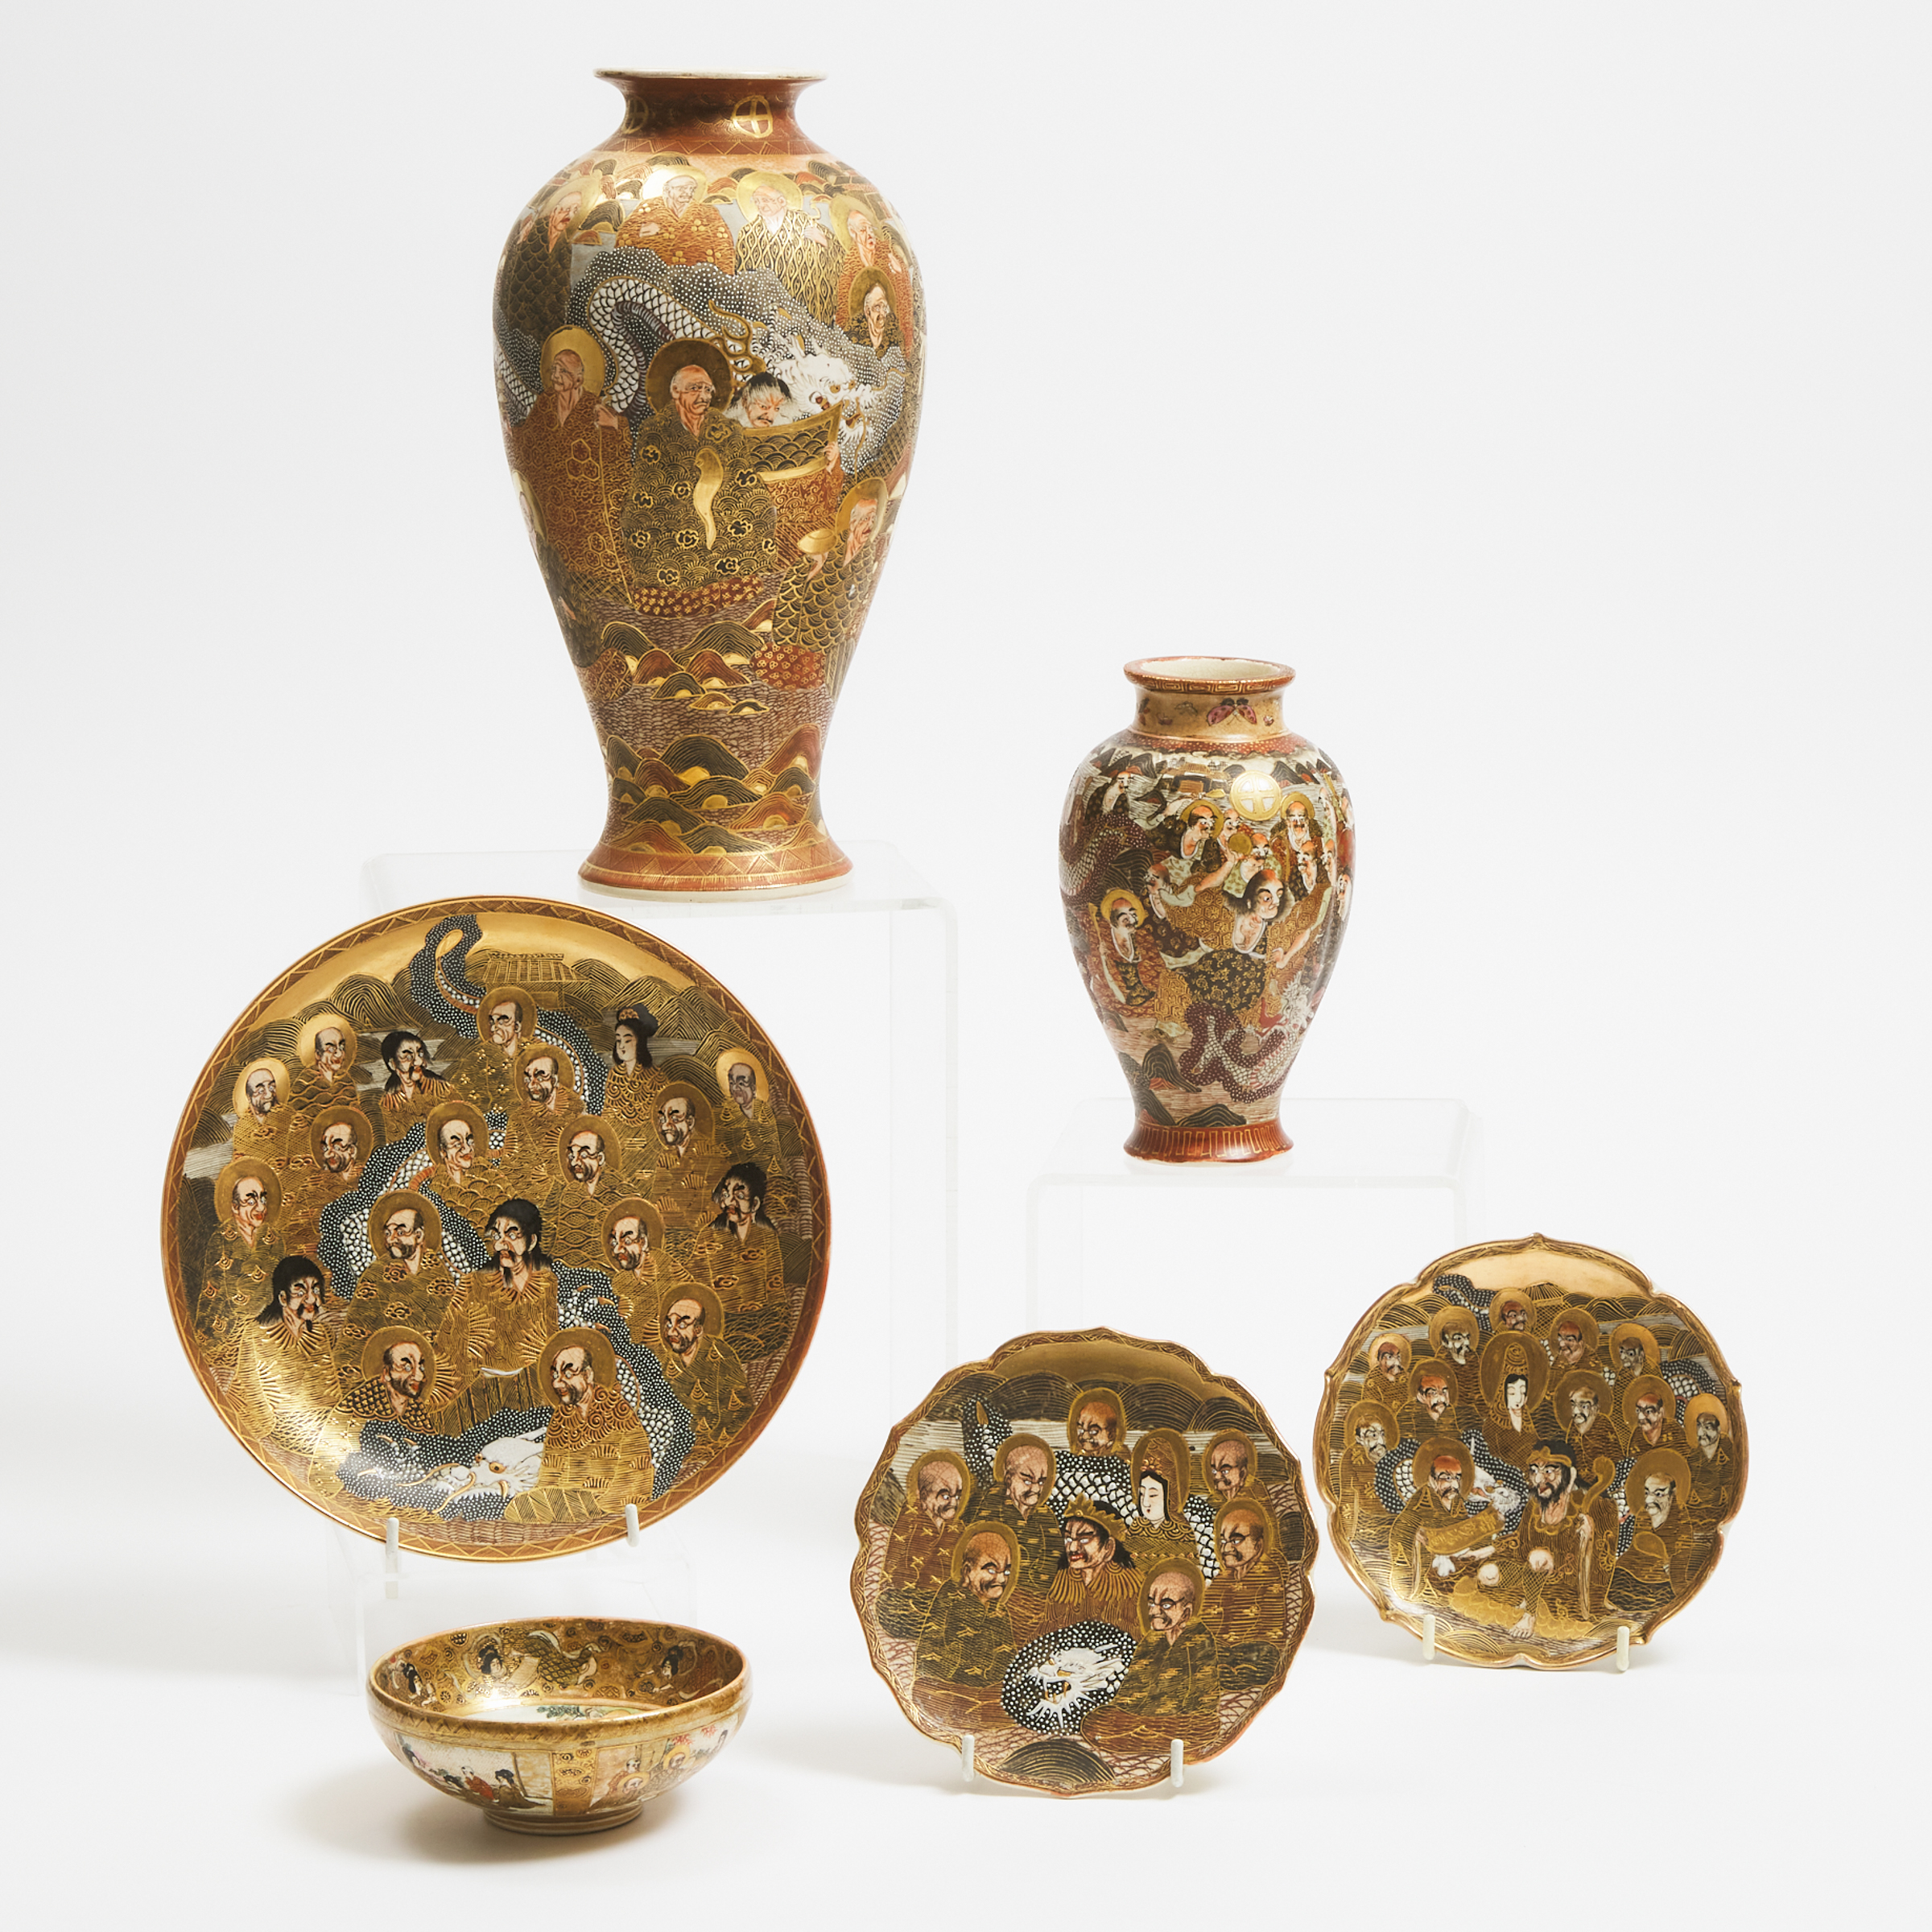 A Group of Six Satsuma 'Buddhist Disciples' Vases, Chargers and Bowl, Meiji/Taisho Period (1868-1926)